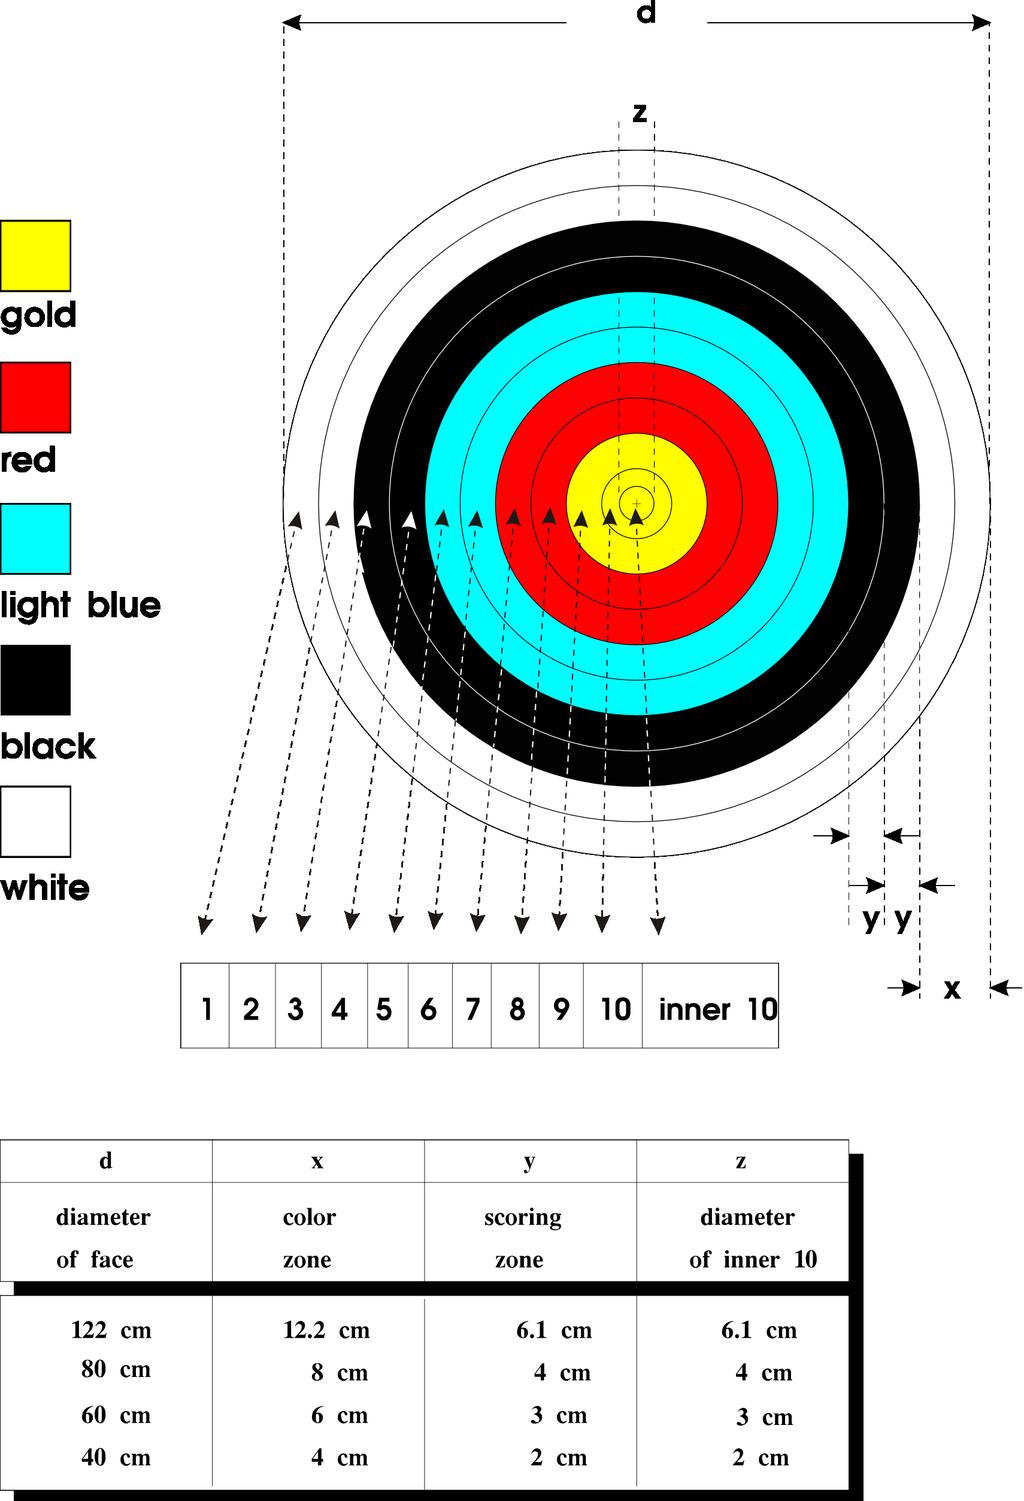 Image 5: 1-10 Scring Znes Target Face 7.2.2.4. Academic Rund Hit/Miss target face: 7.2.2.4.1. The Academic Rund Target face is a Hit/Miss target cnsisting f tw znes: a hit zne and a miss zne.